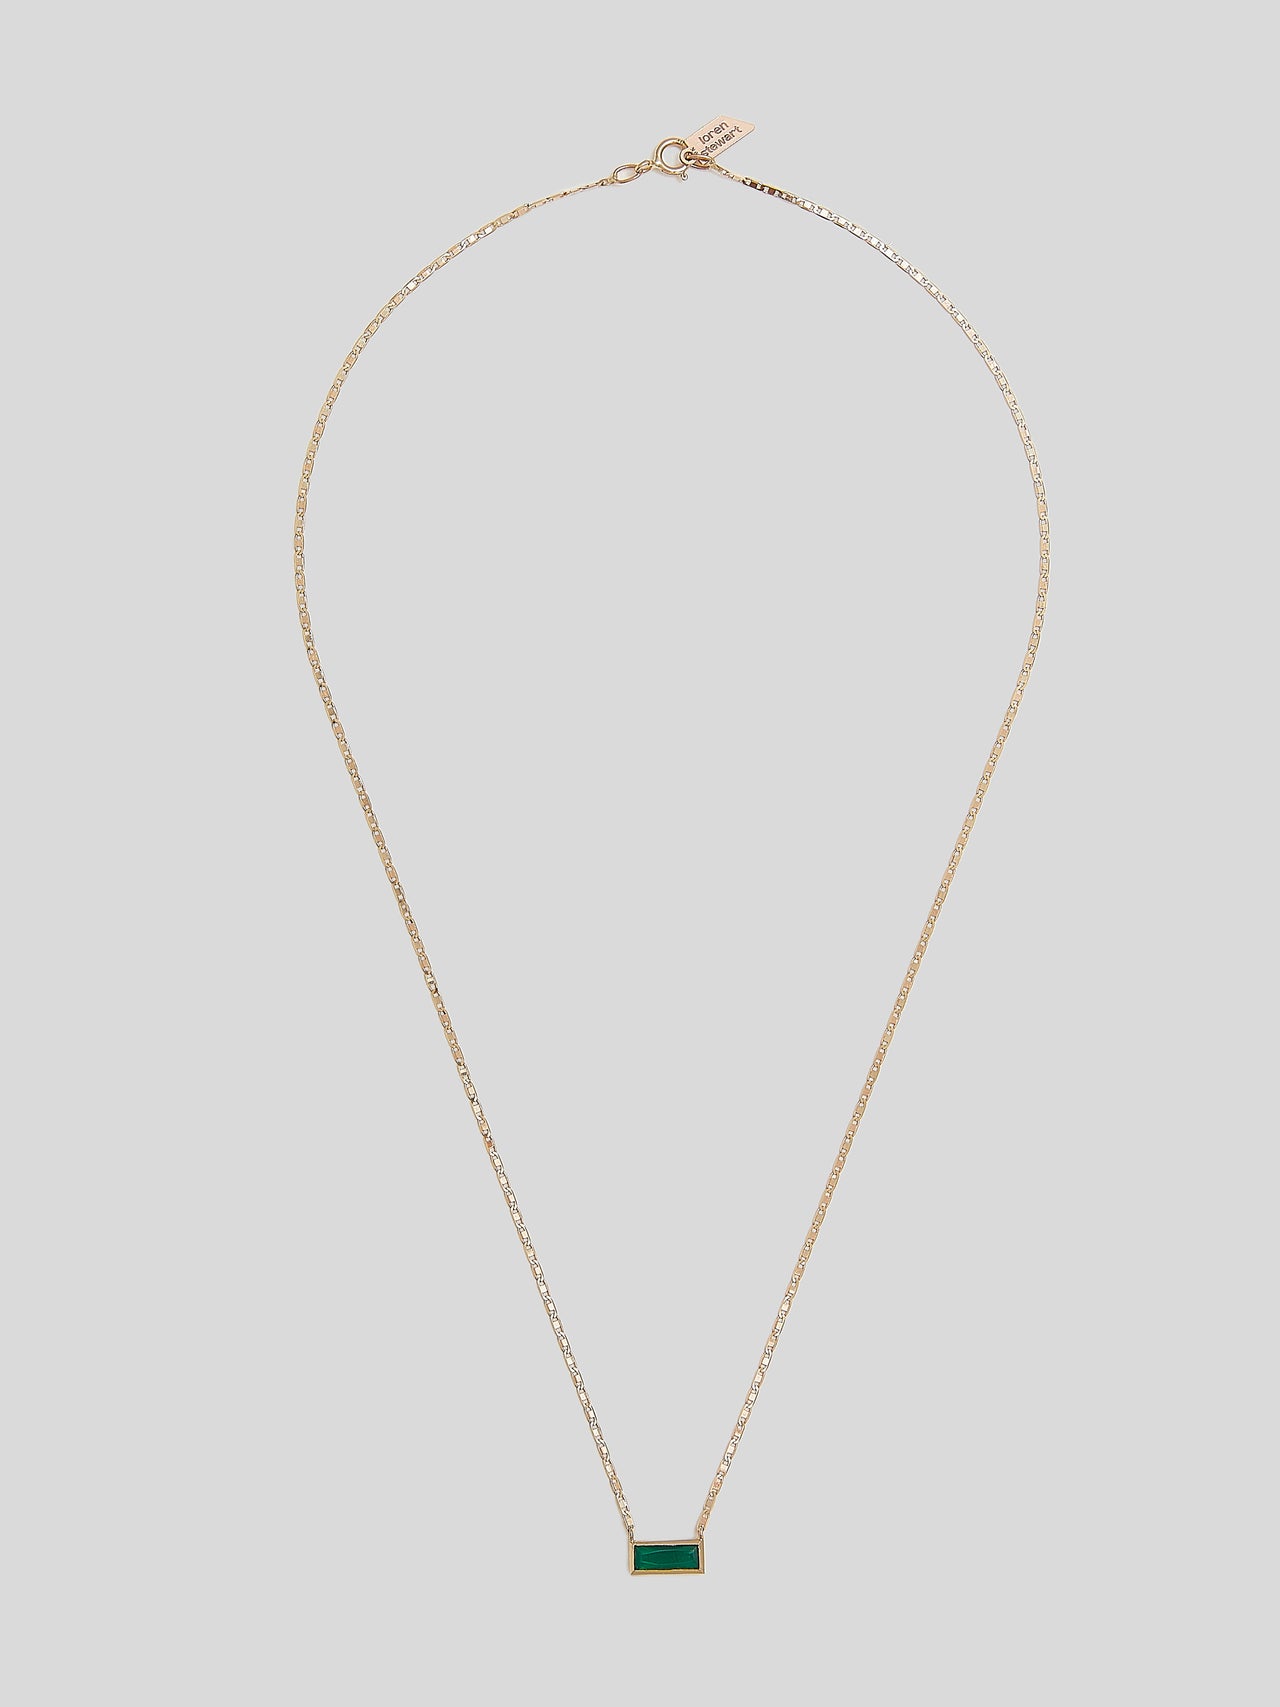 Product image of 10kt yellow gold thin chain necklace with thin green rectangular gemstone on white background. 